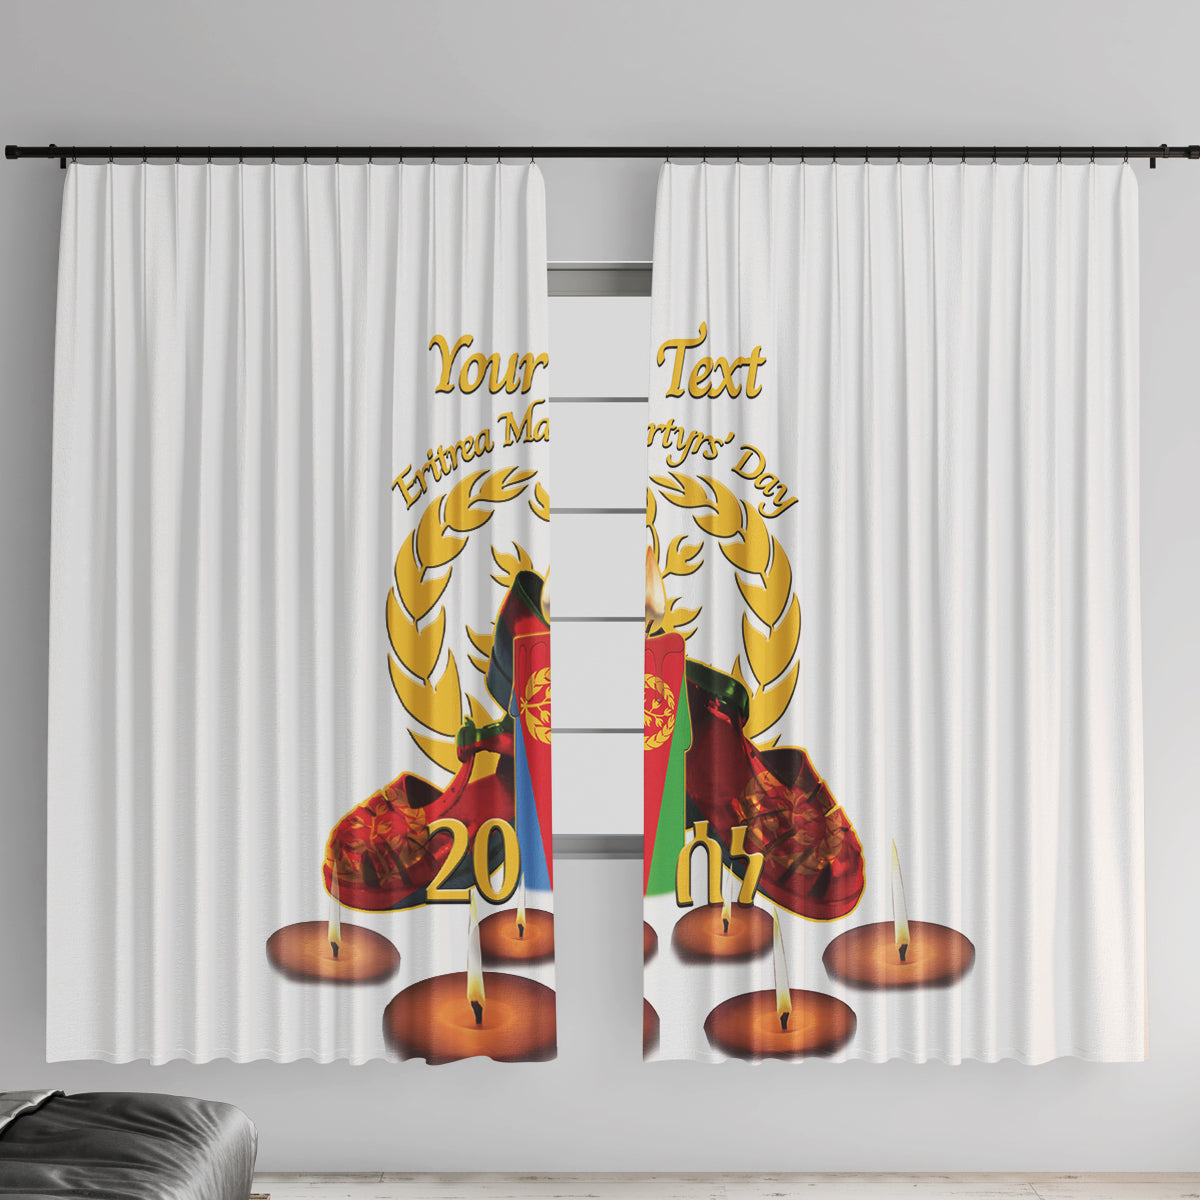 Custom Eritrea Martyrs' Day Window Curtain 20 June Shida Shoes With Candles - White